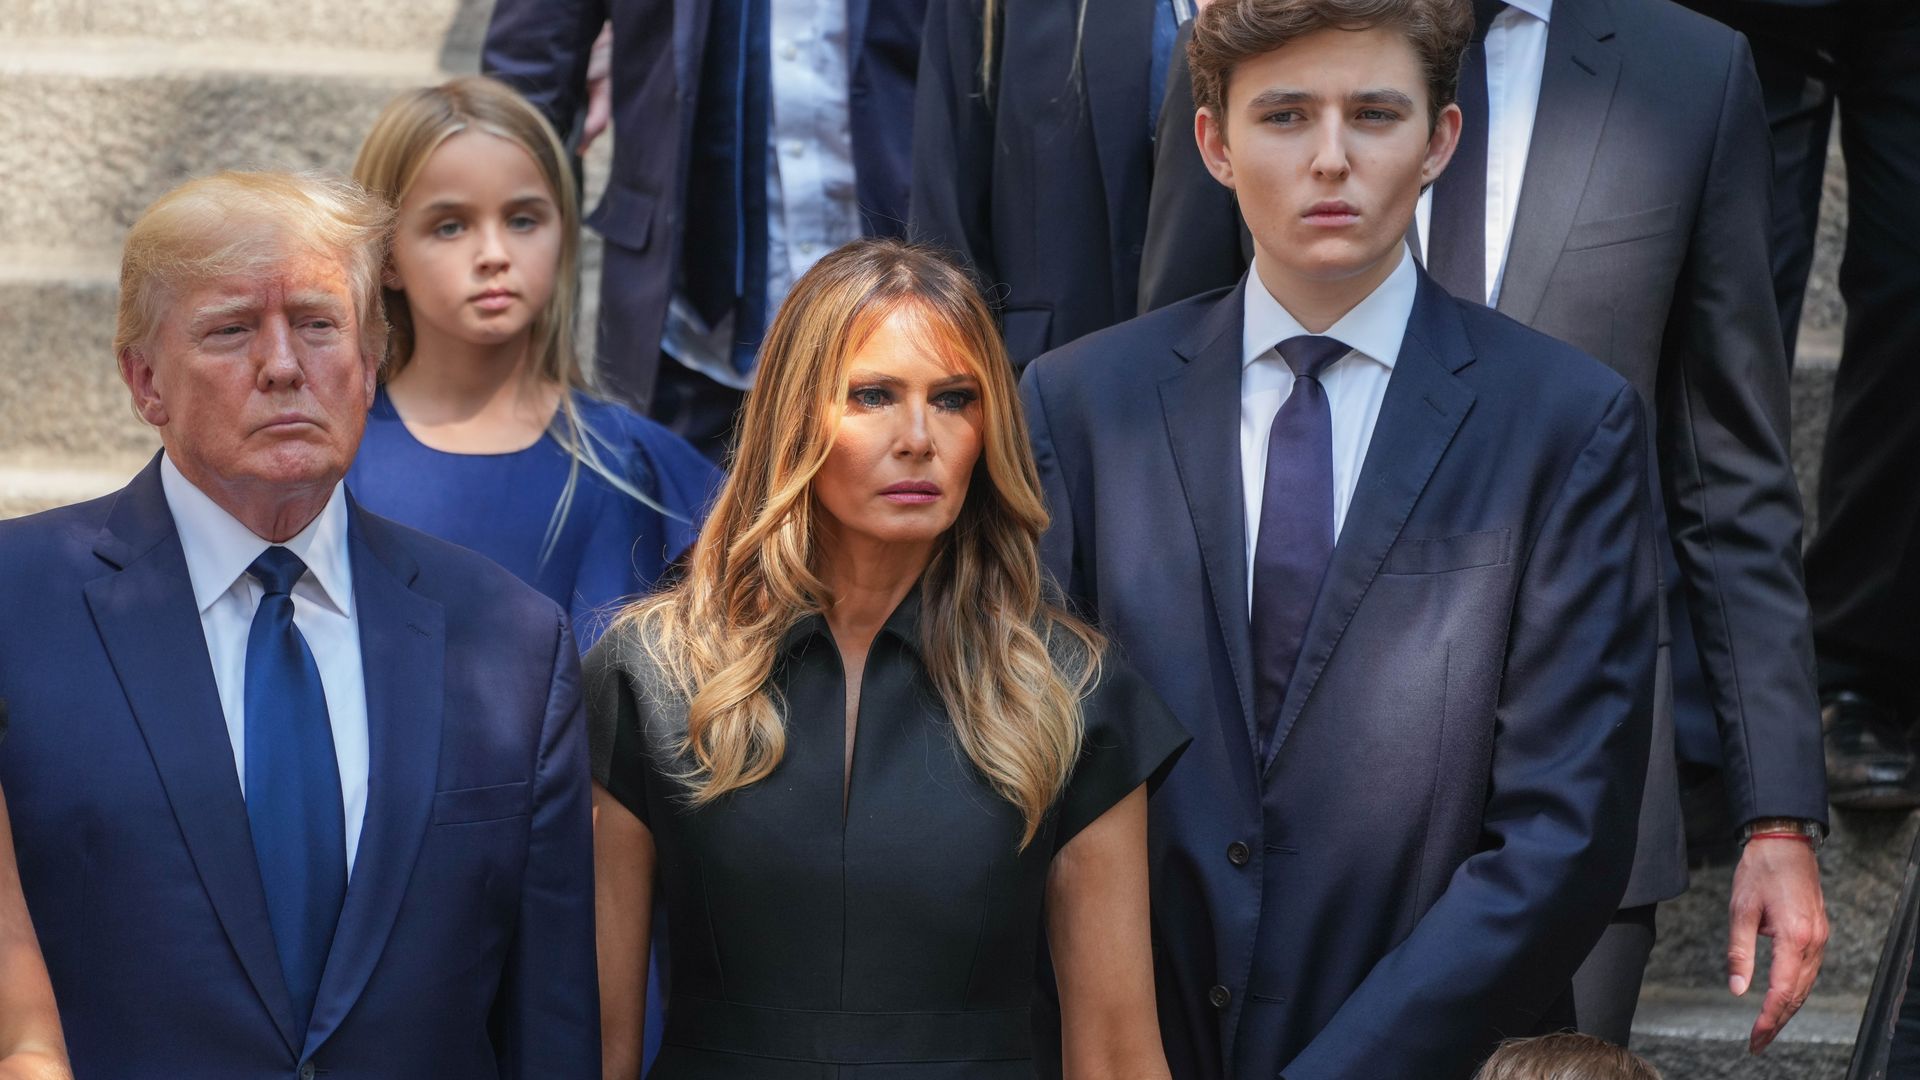 Barron Trump declines political role amid father Donald Trump's criminal trial — here's why